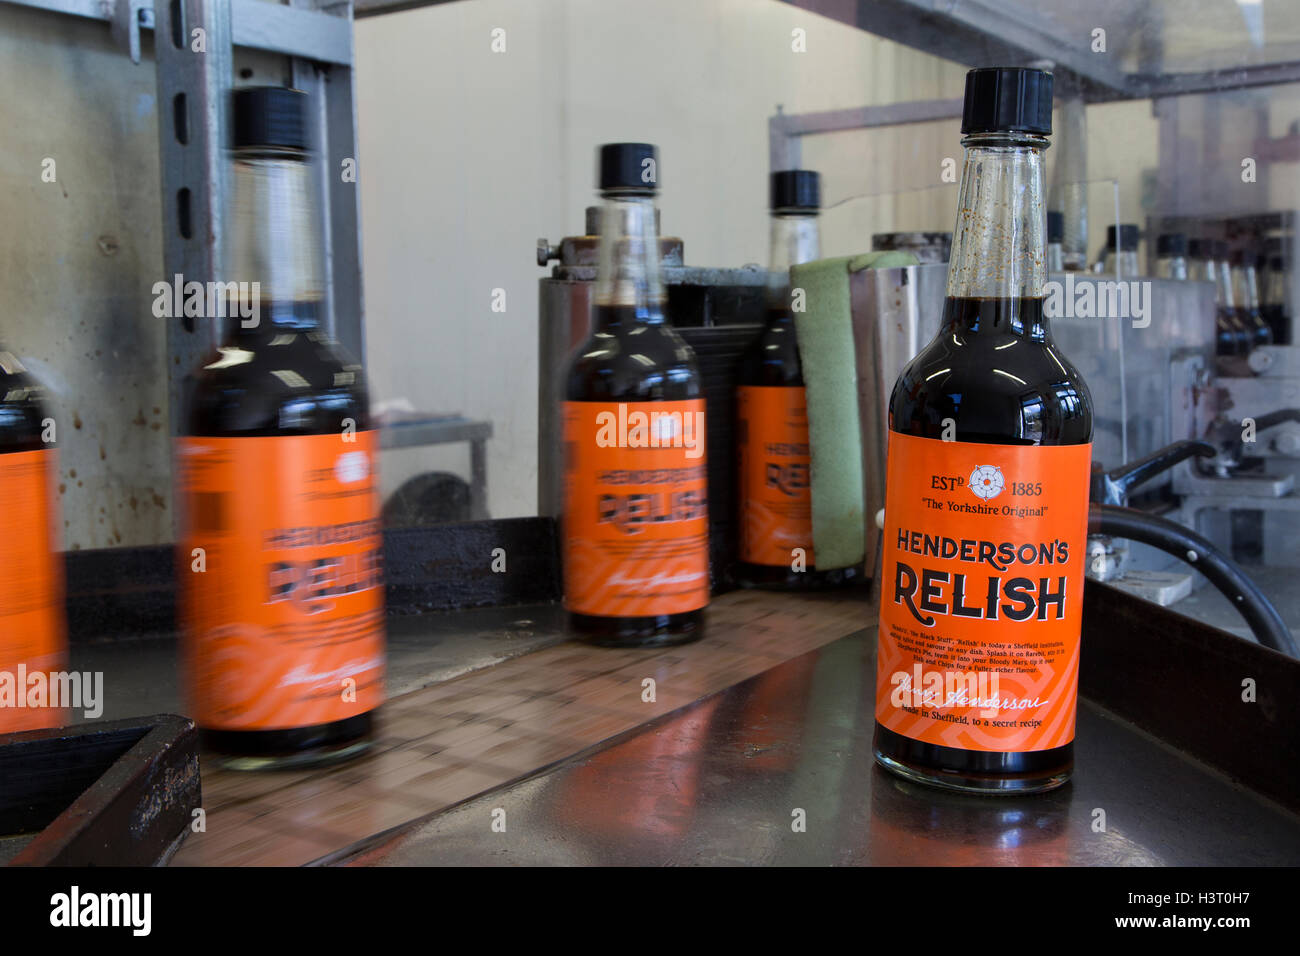 Hendersons Relish a condiment similar to Worcester Sauce relish has been produced in Sheffield, South Yorkshire since 1885 Stock Photo